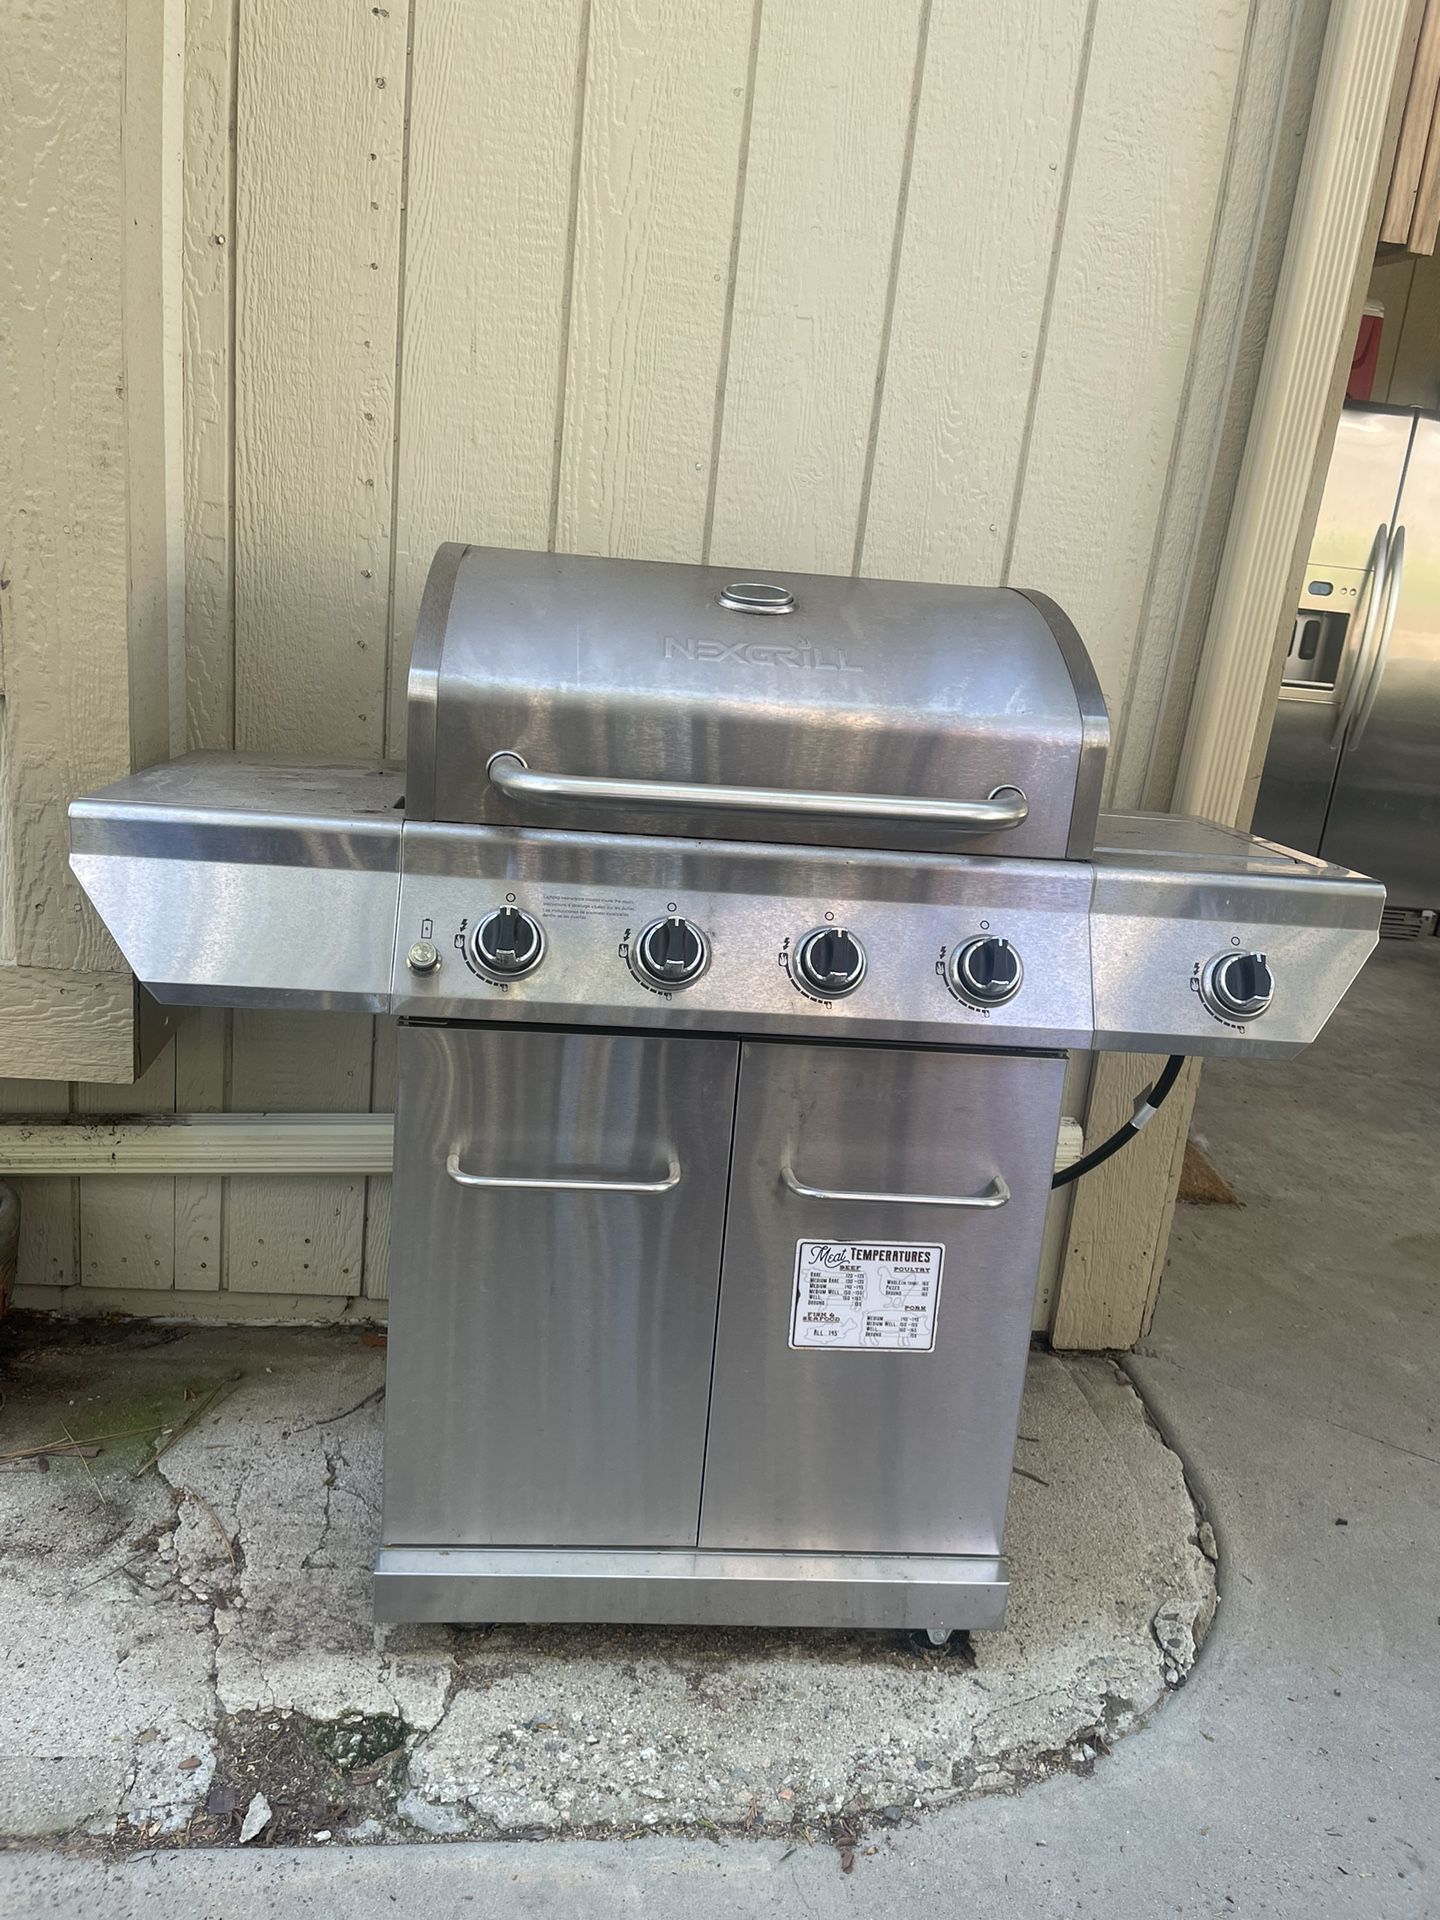 BBQ Nexgrill Gas Grill With Cover And Empty Propane Tank